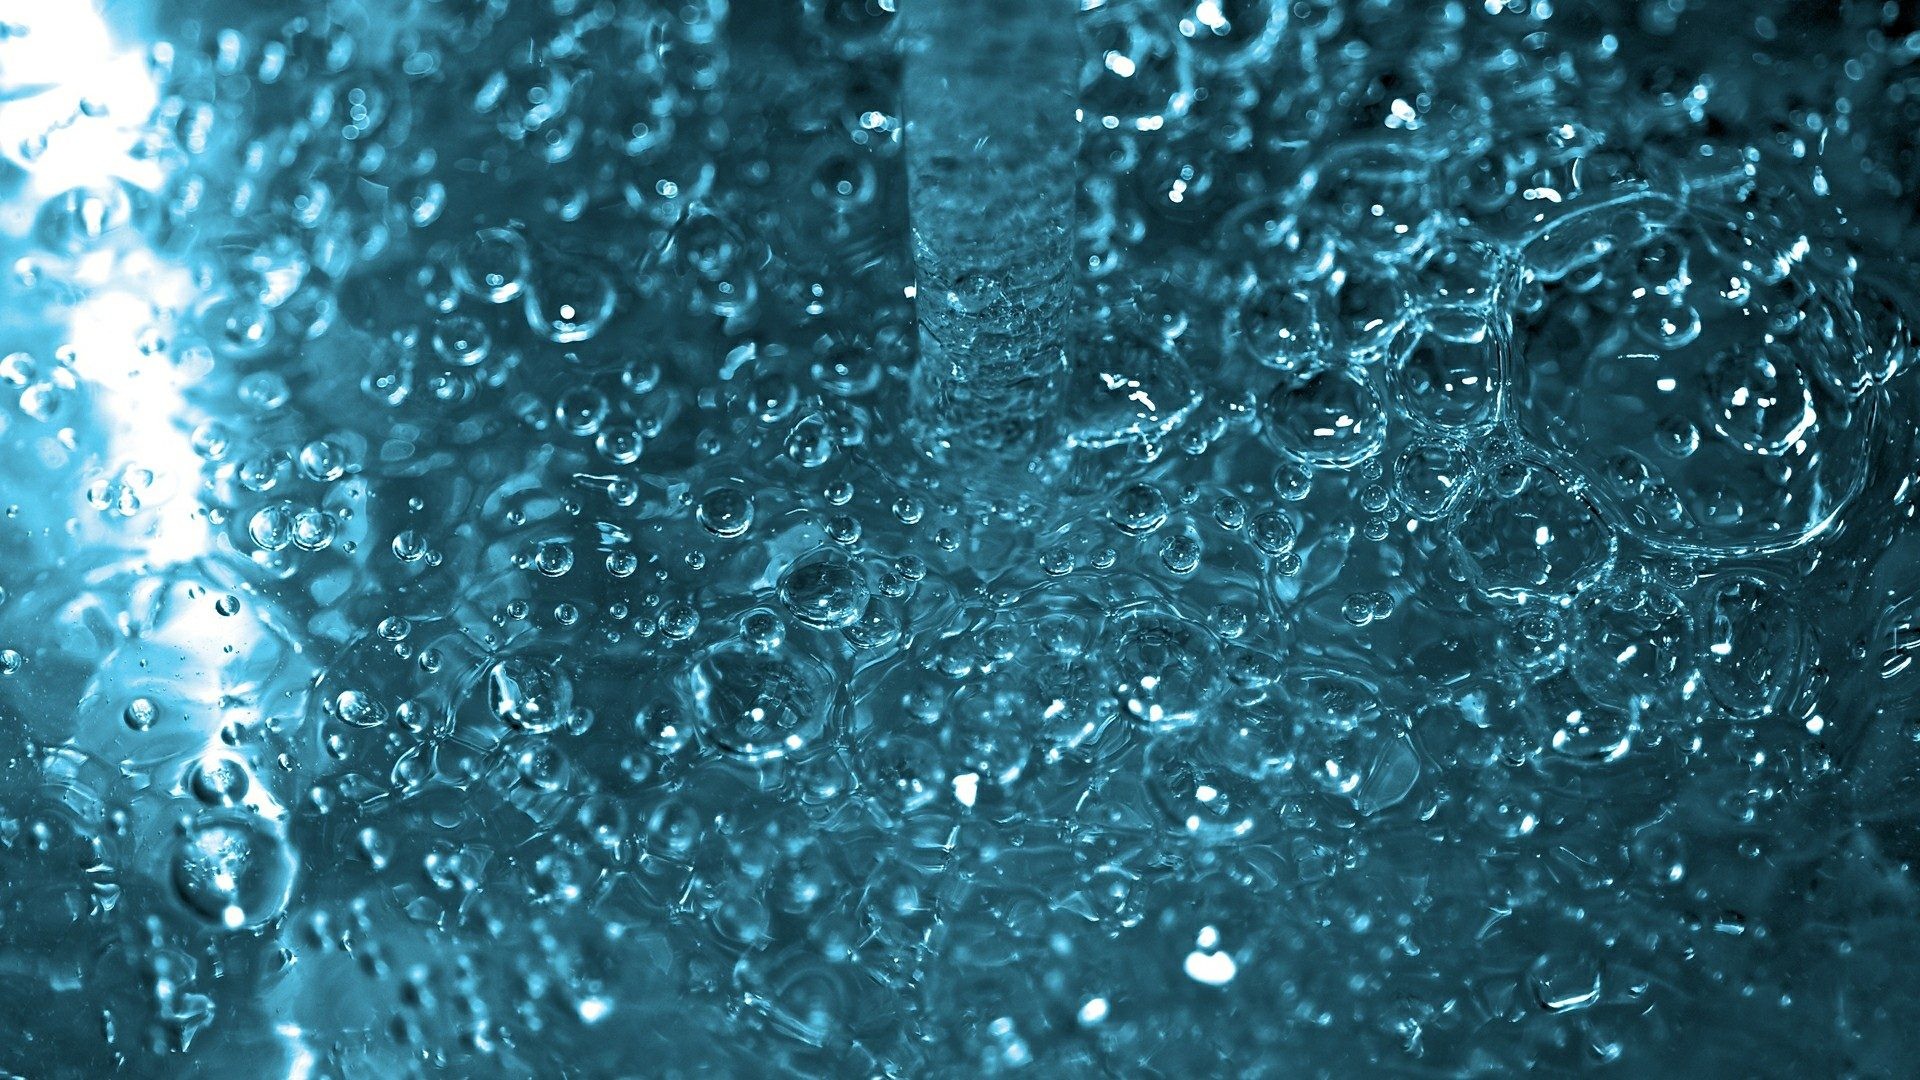 1920x1080 Live 3d water wallpapers